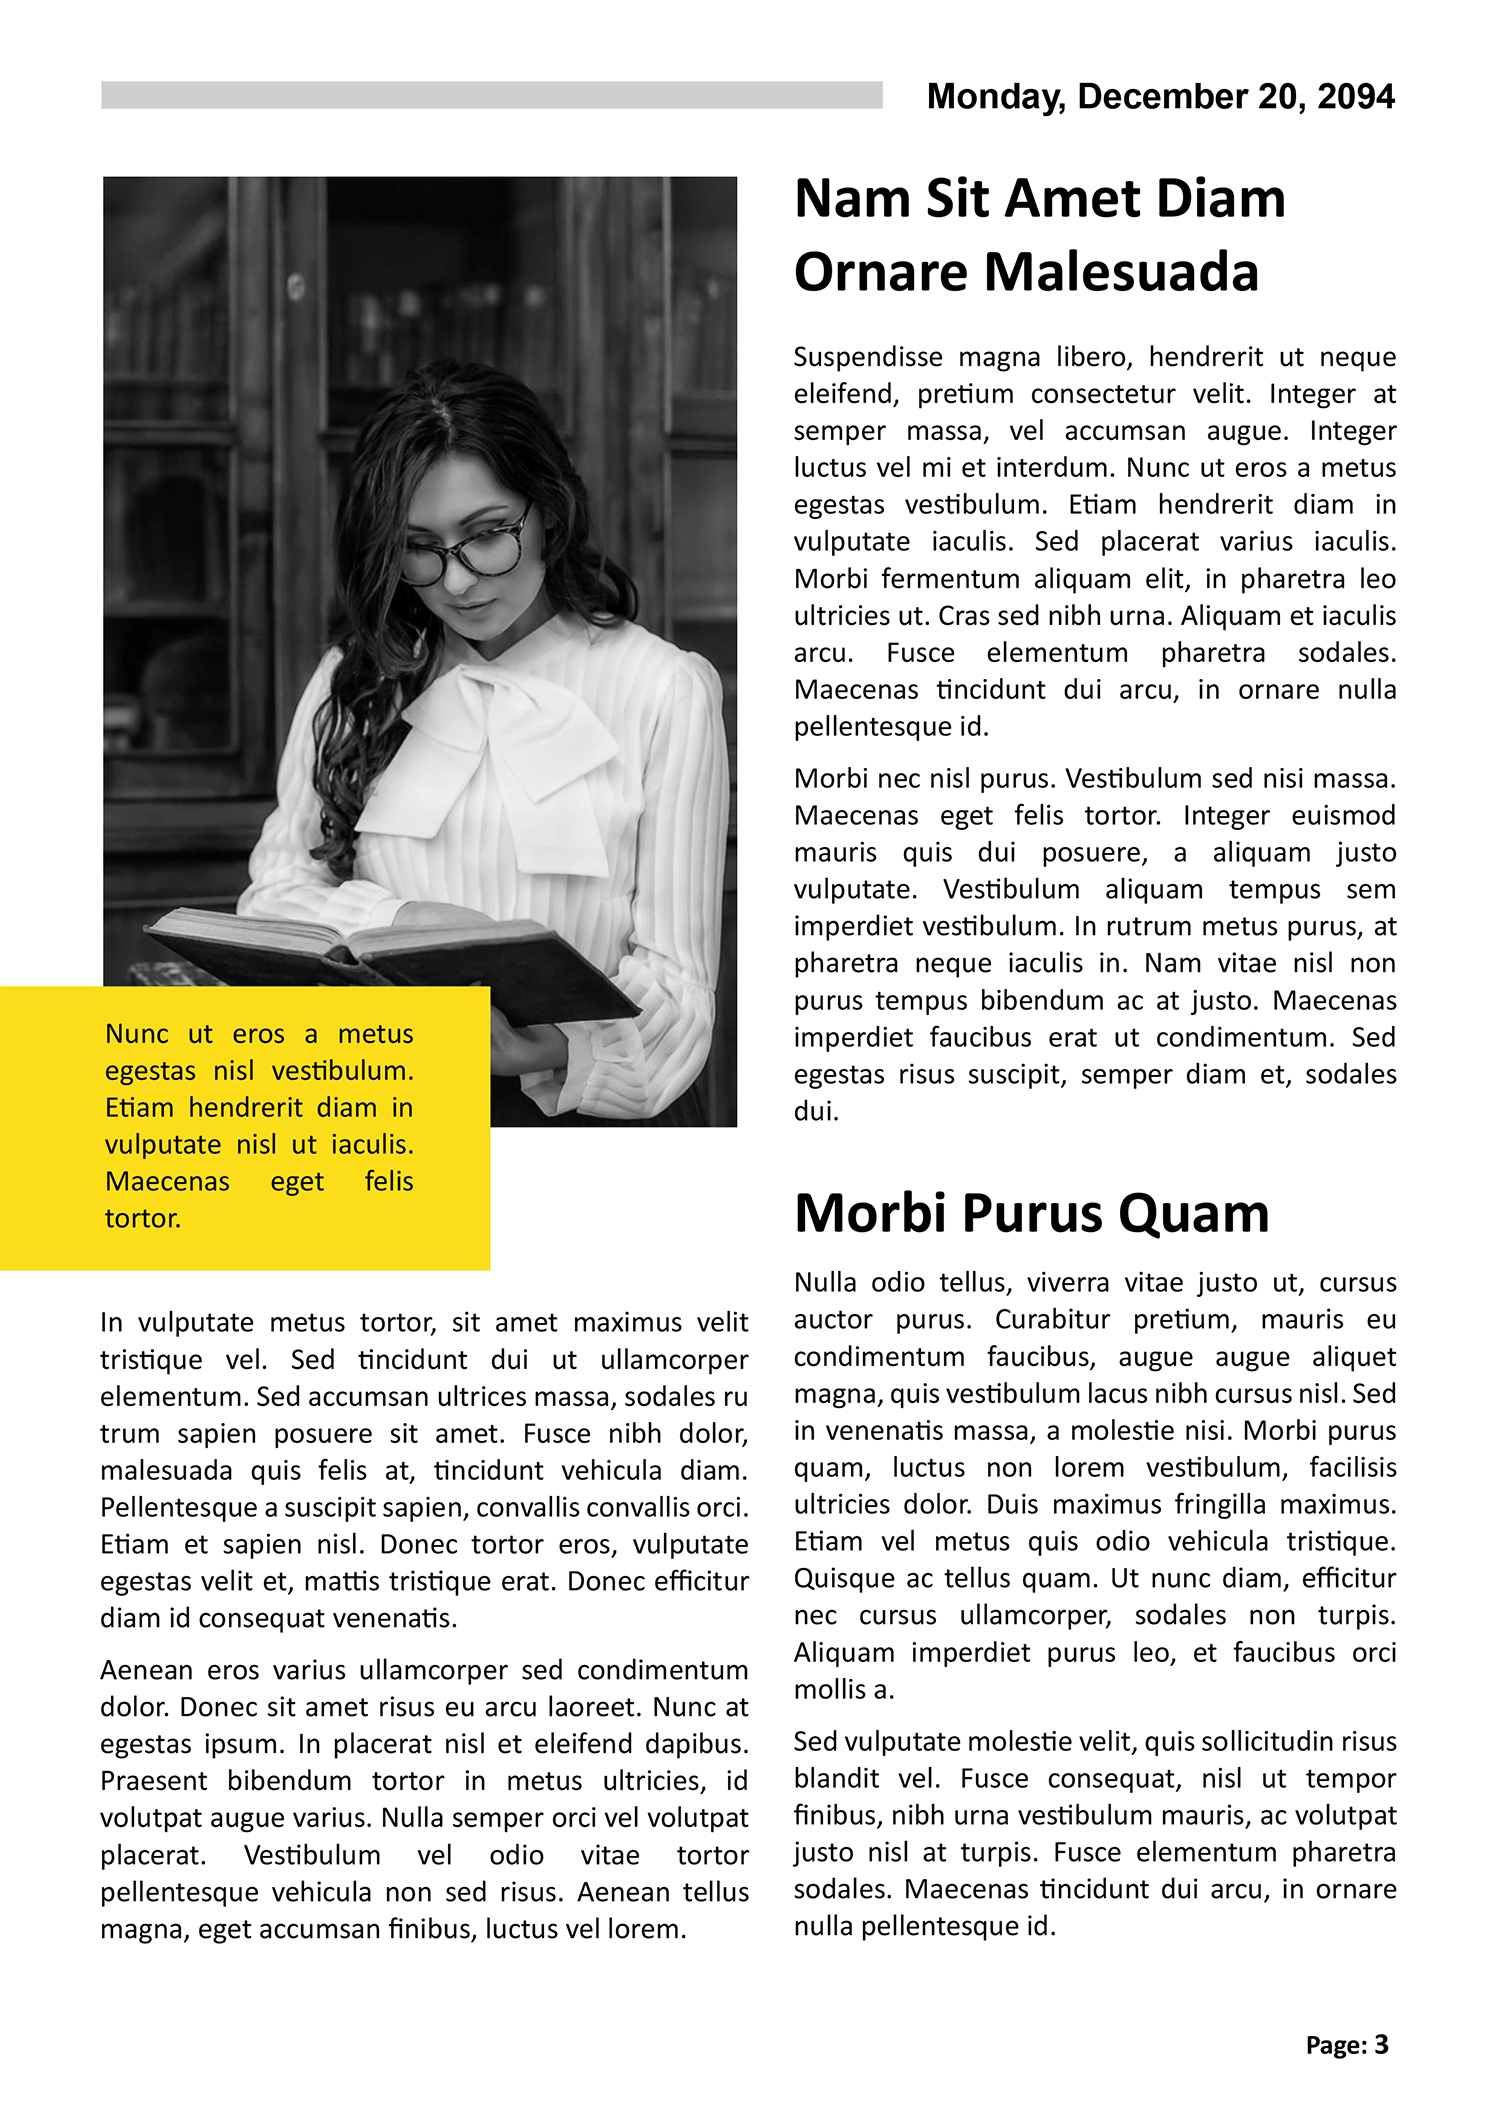 School Newspaper Article Template - Page 03